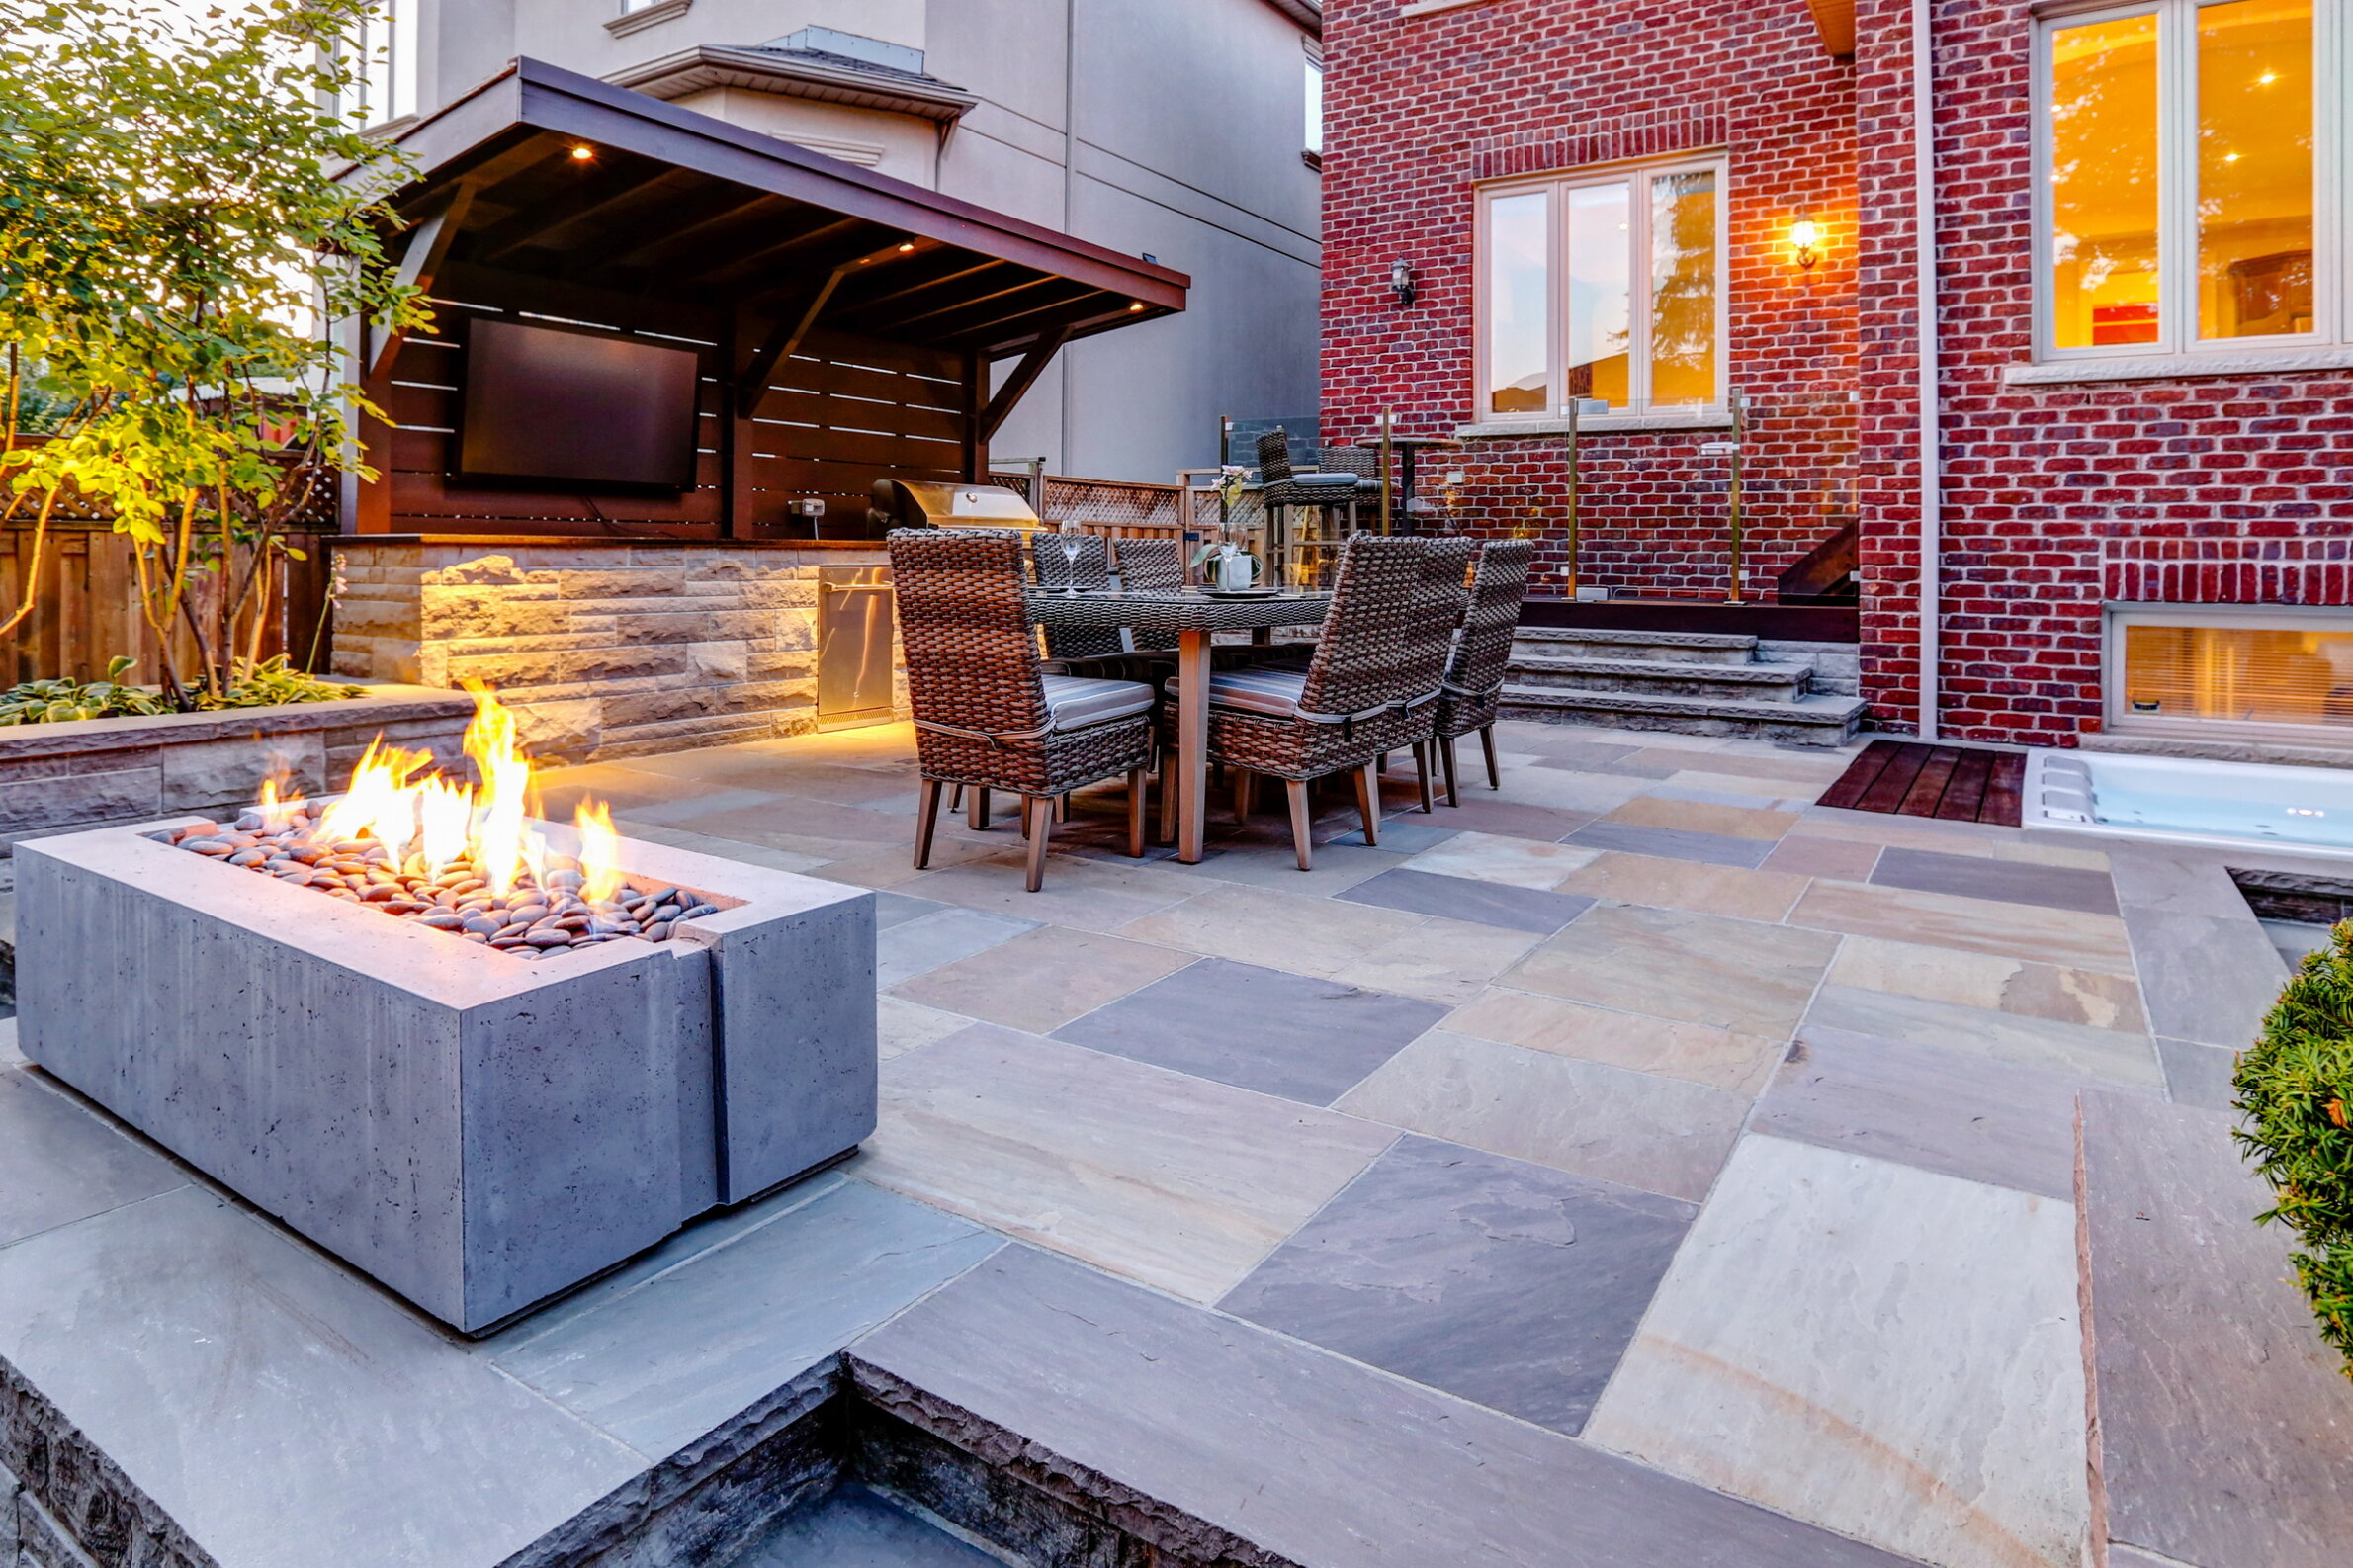 This image shows an outdoor patio with a fire pit, dining furniture, a pergola with a mounted TV, and a hot tub beside a brick house.